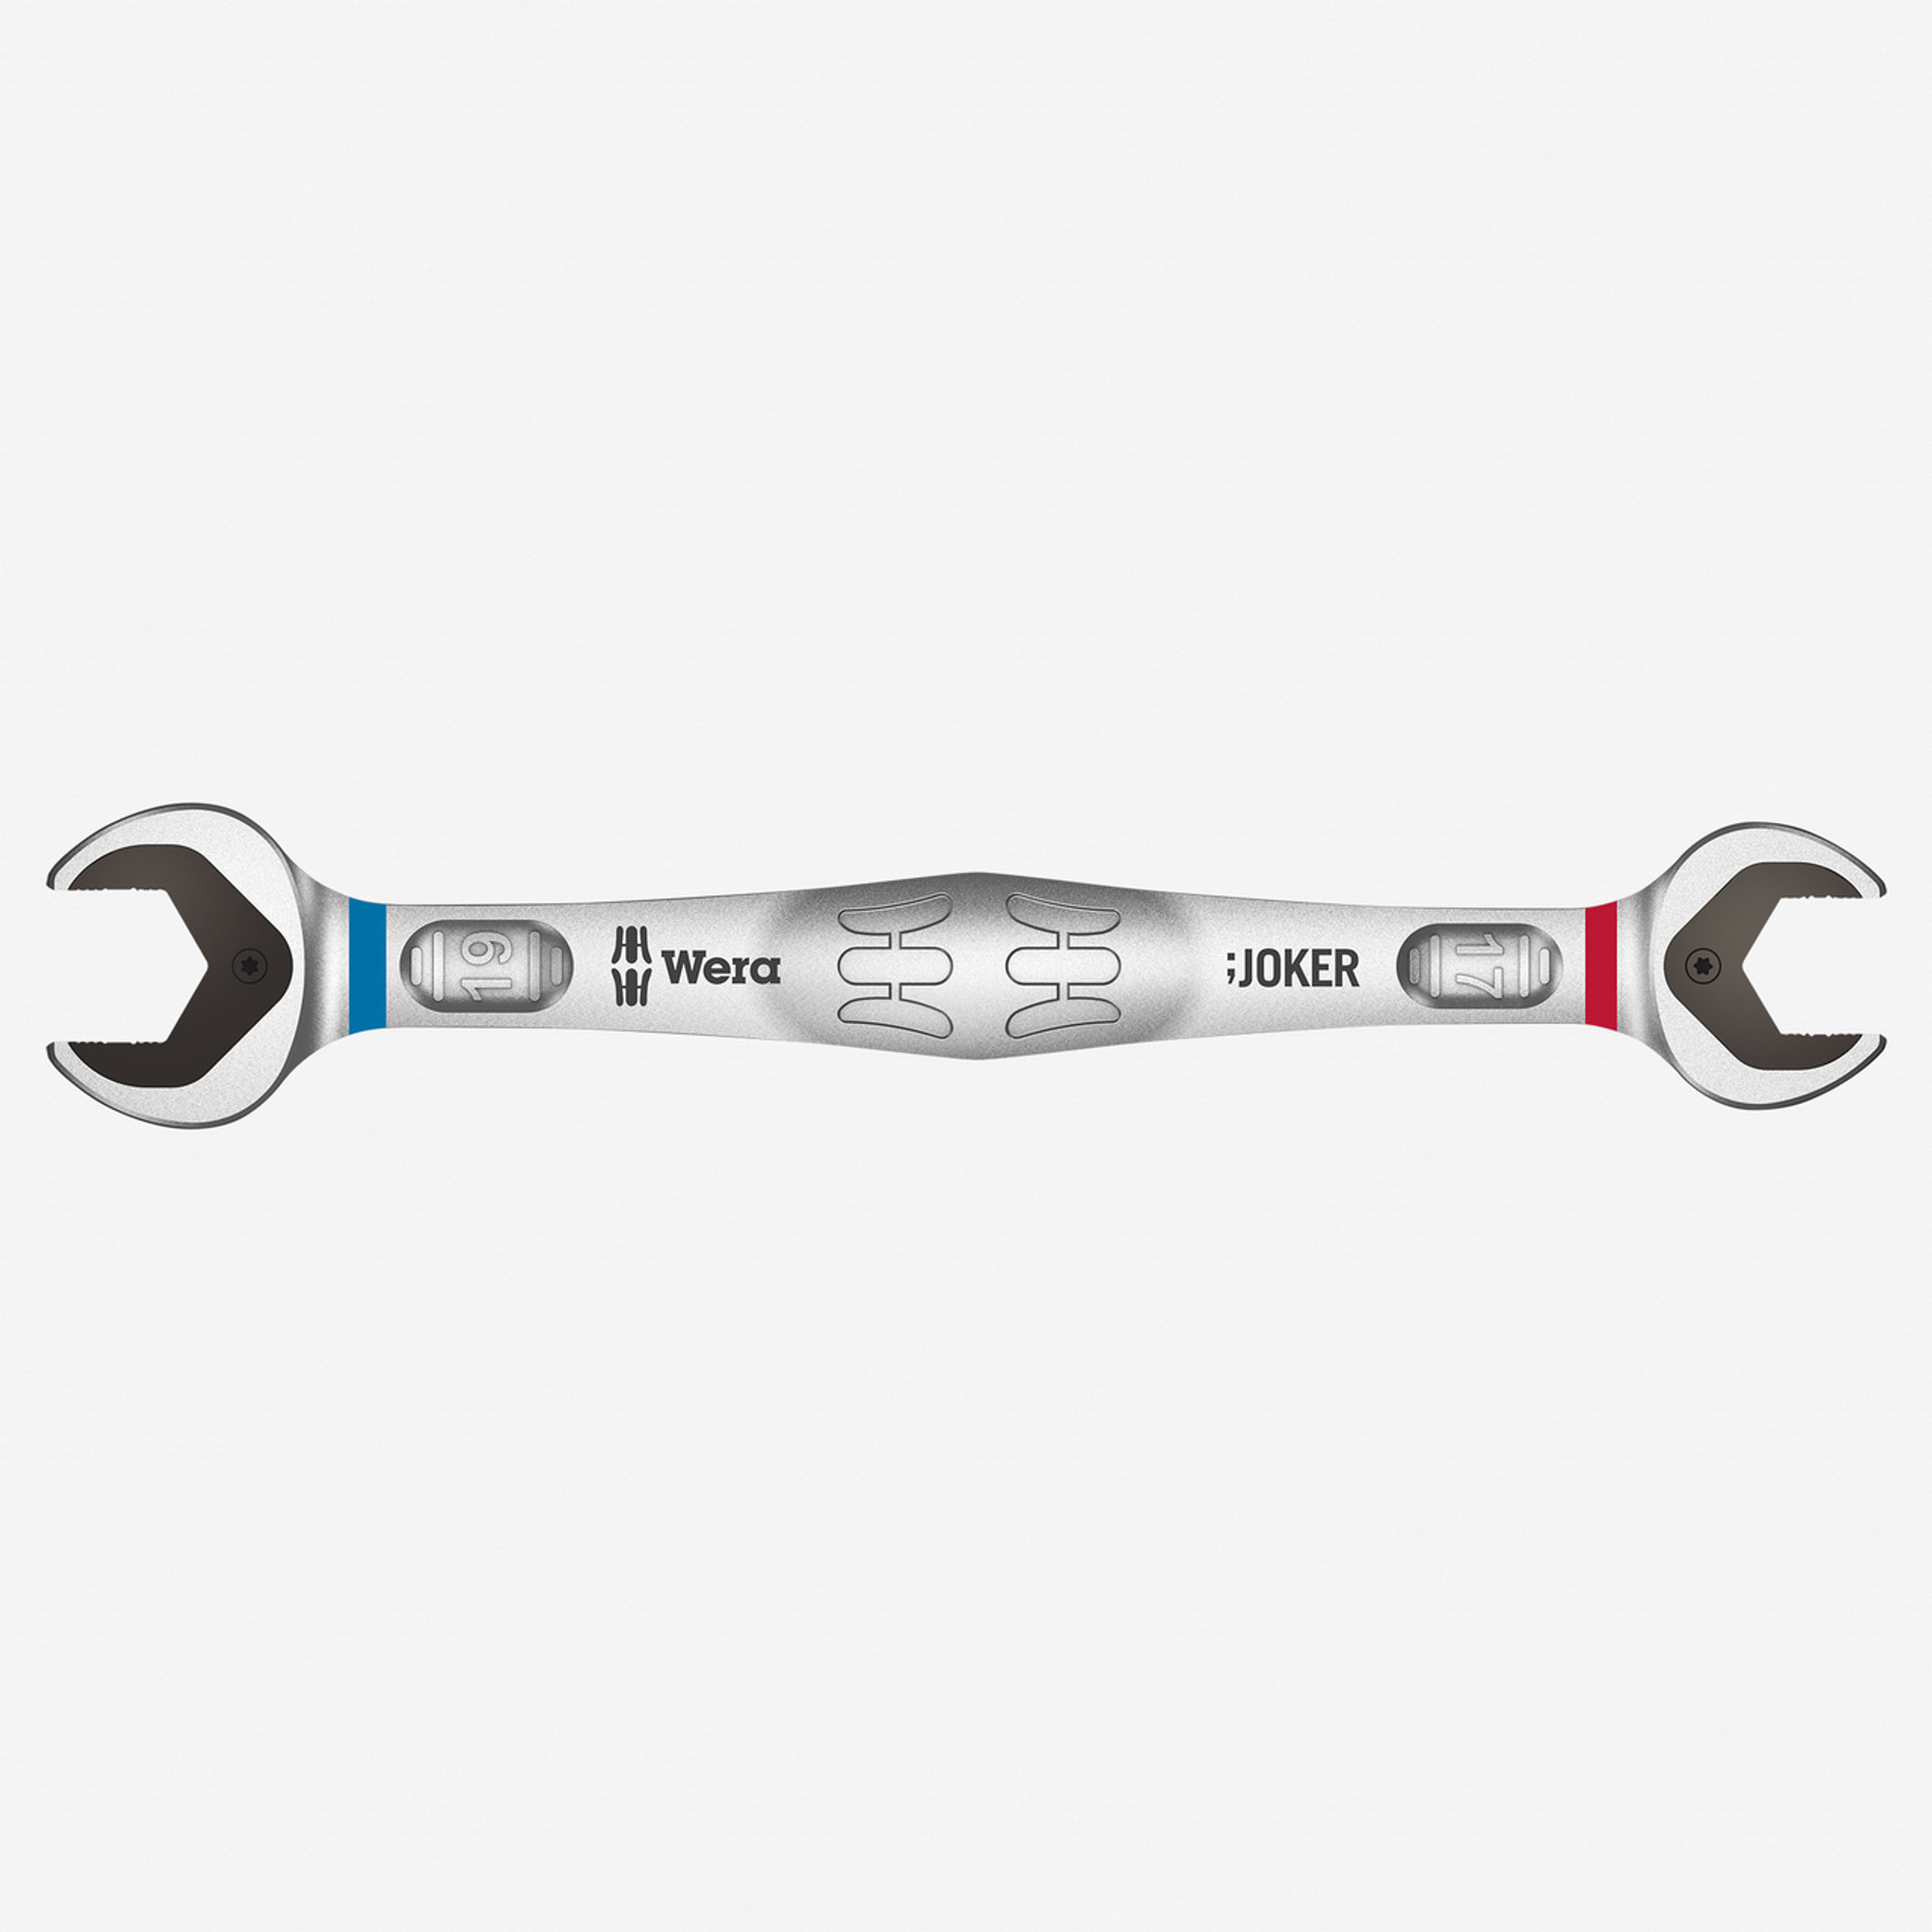 Wera Individual 6002 Joker Double Open End Spanner Wrench Metric 10-32mm